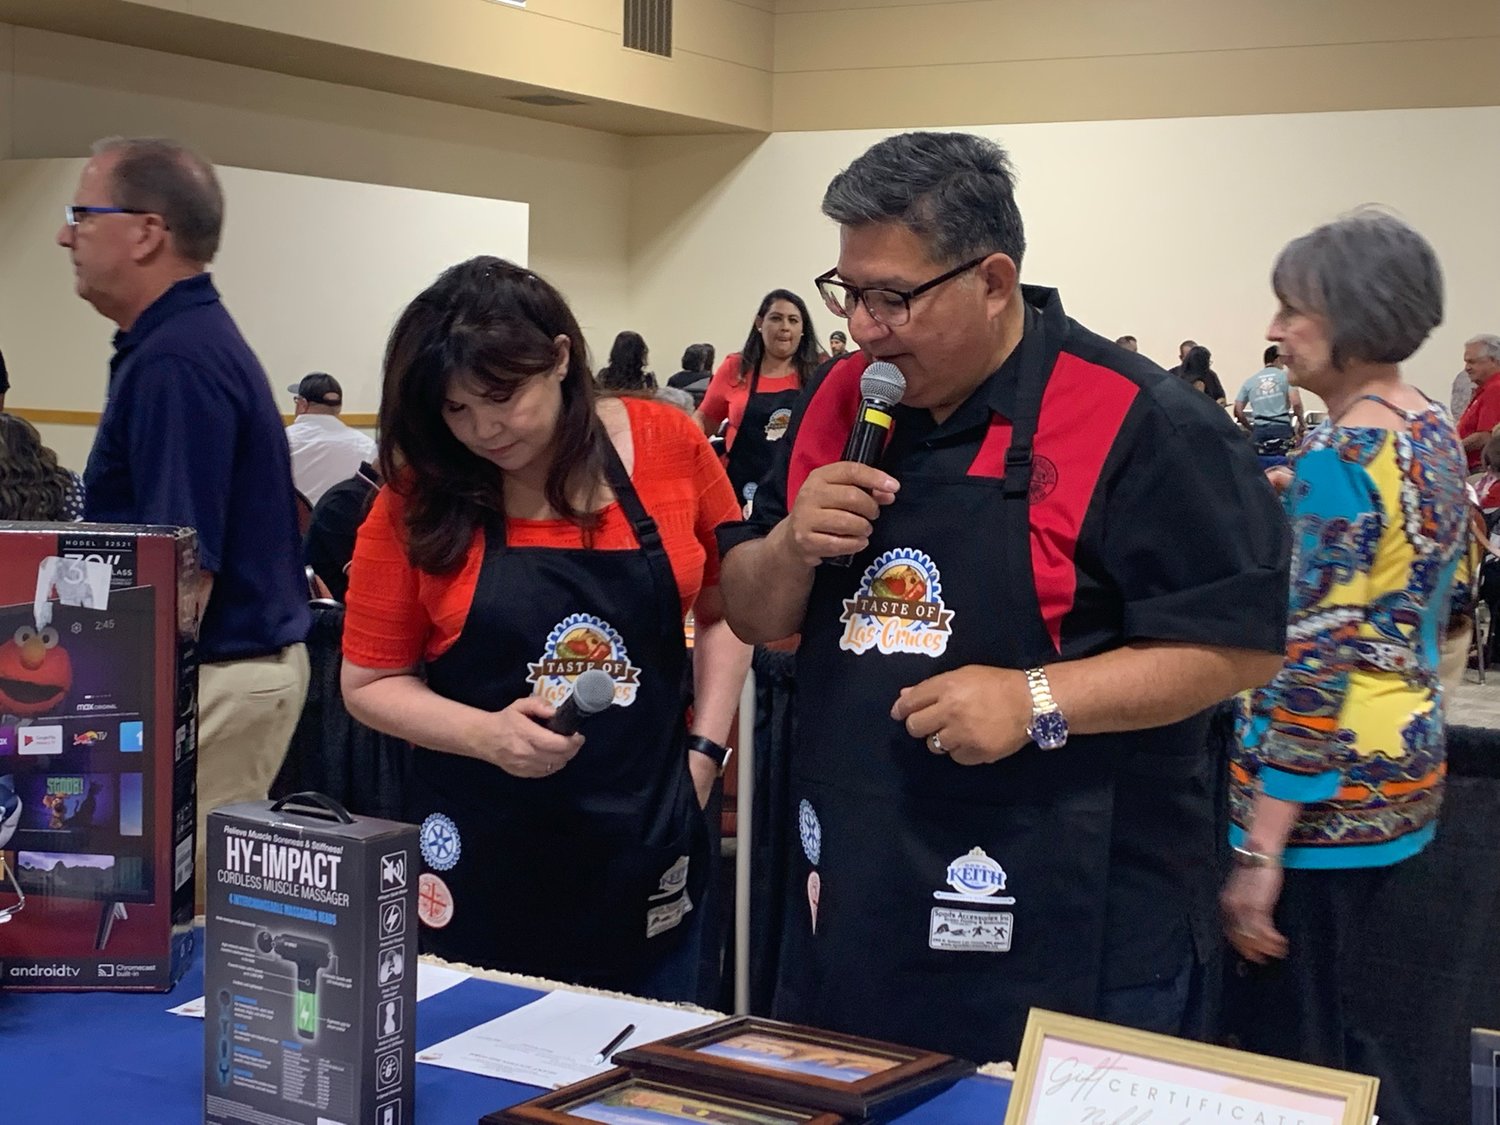 Stephanie Guadian of Electronic Caregiver and Lorenzo Alba with Casa de Peregrinos serve as emcees for the Taste of Las Cruces event as they talk about silent auction choices.